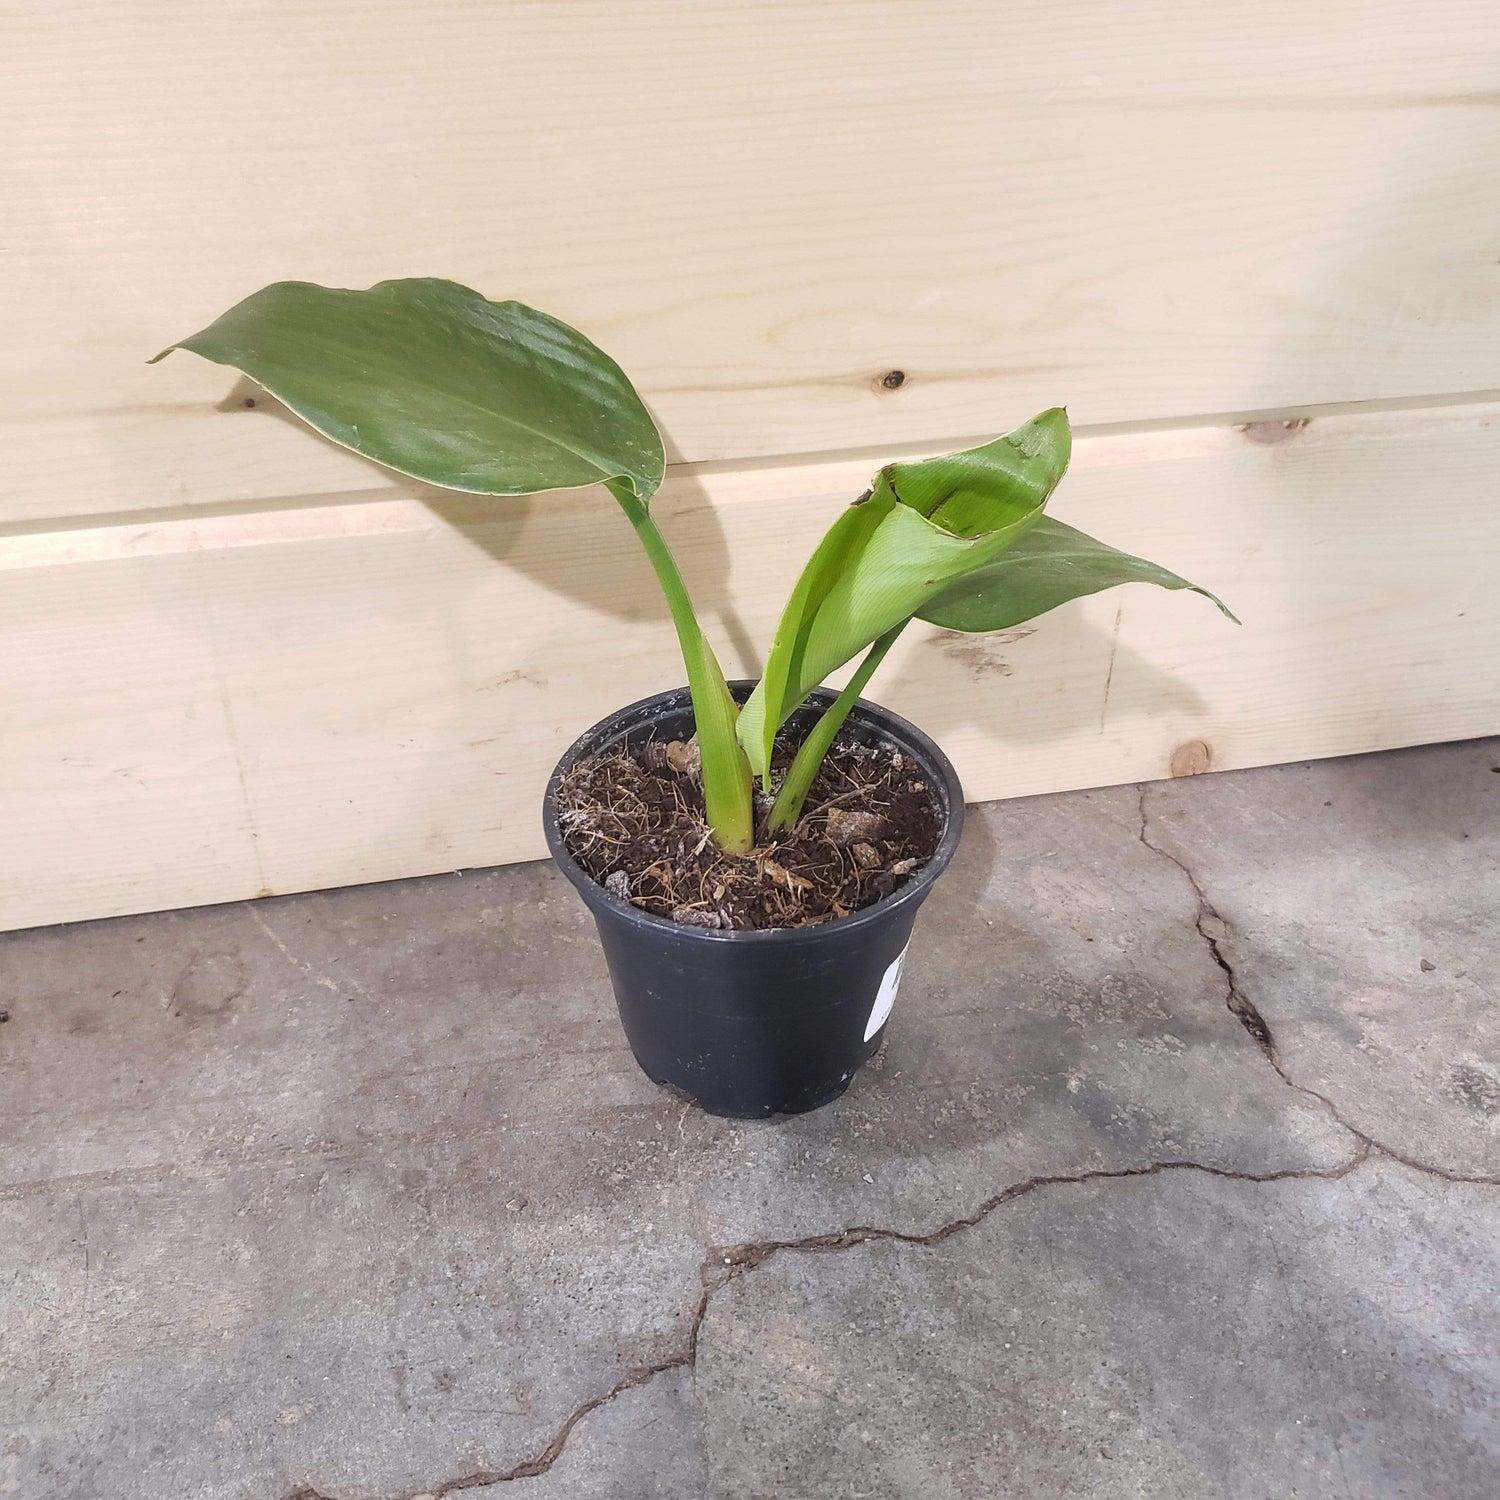 Urban Sprouts Plant 4" in nursery pot Bird of Paradise 'White'